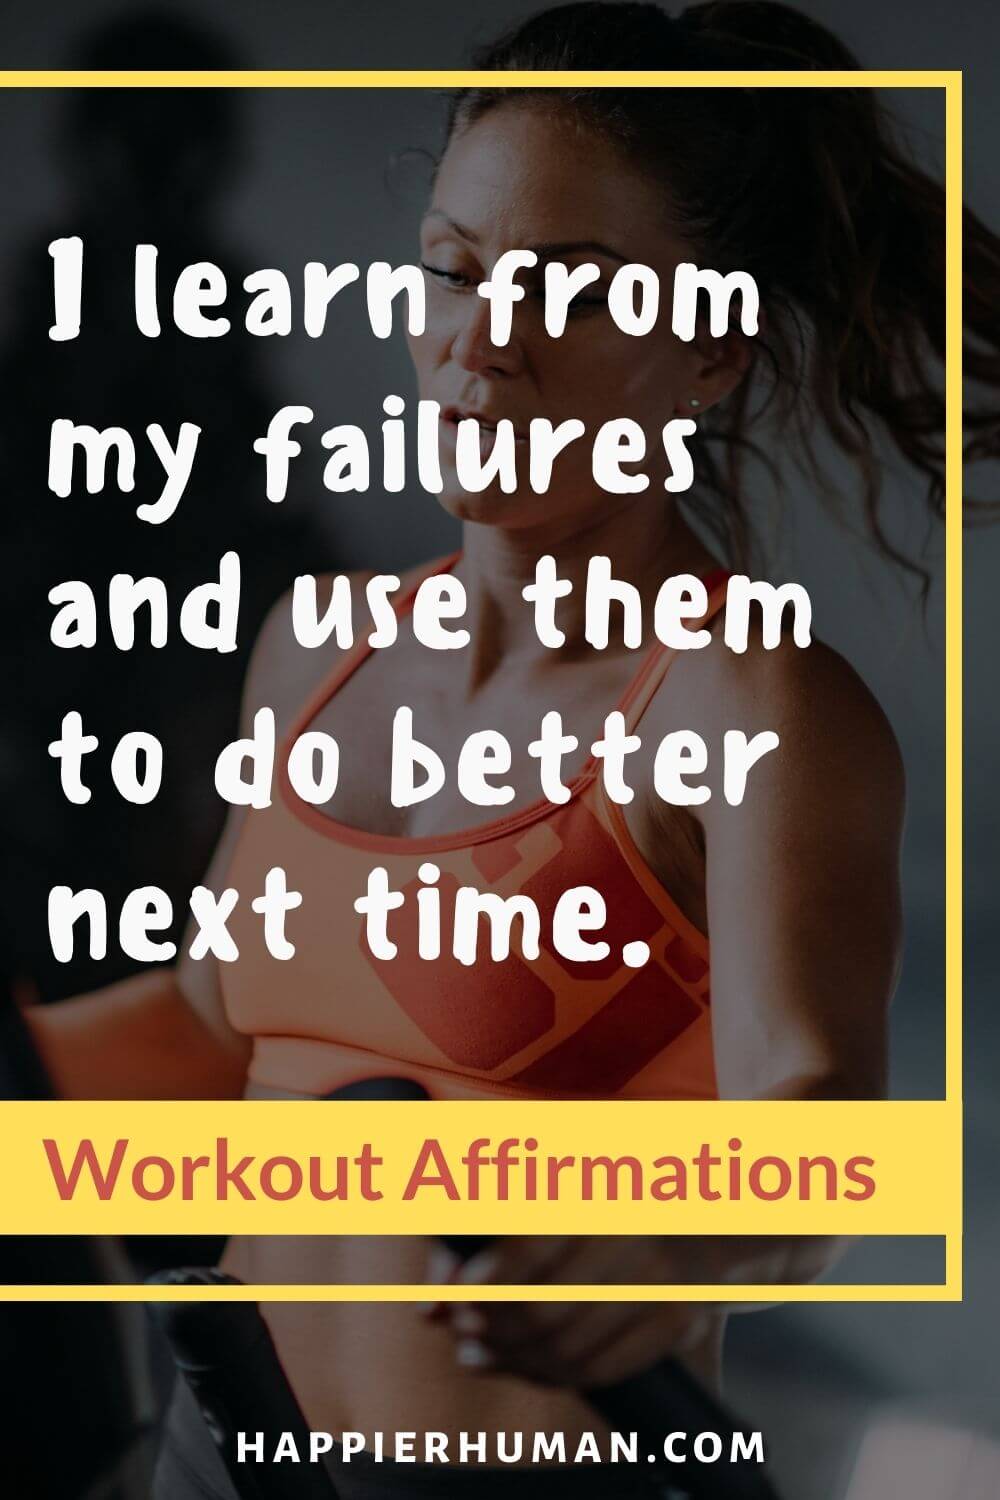 Workout Affirmations - I learn from my failures and use them to do better next time. | healthy body affirmations | affirmations exercise worksheet |